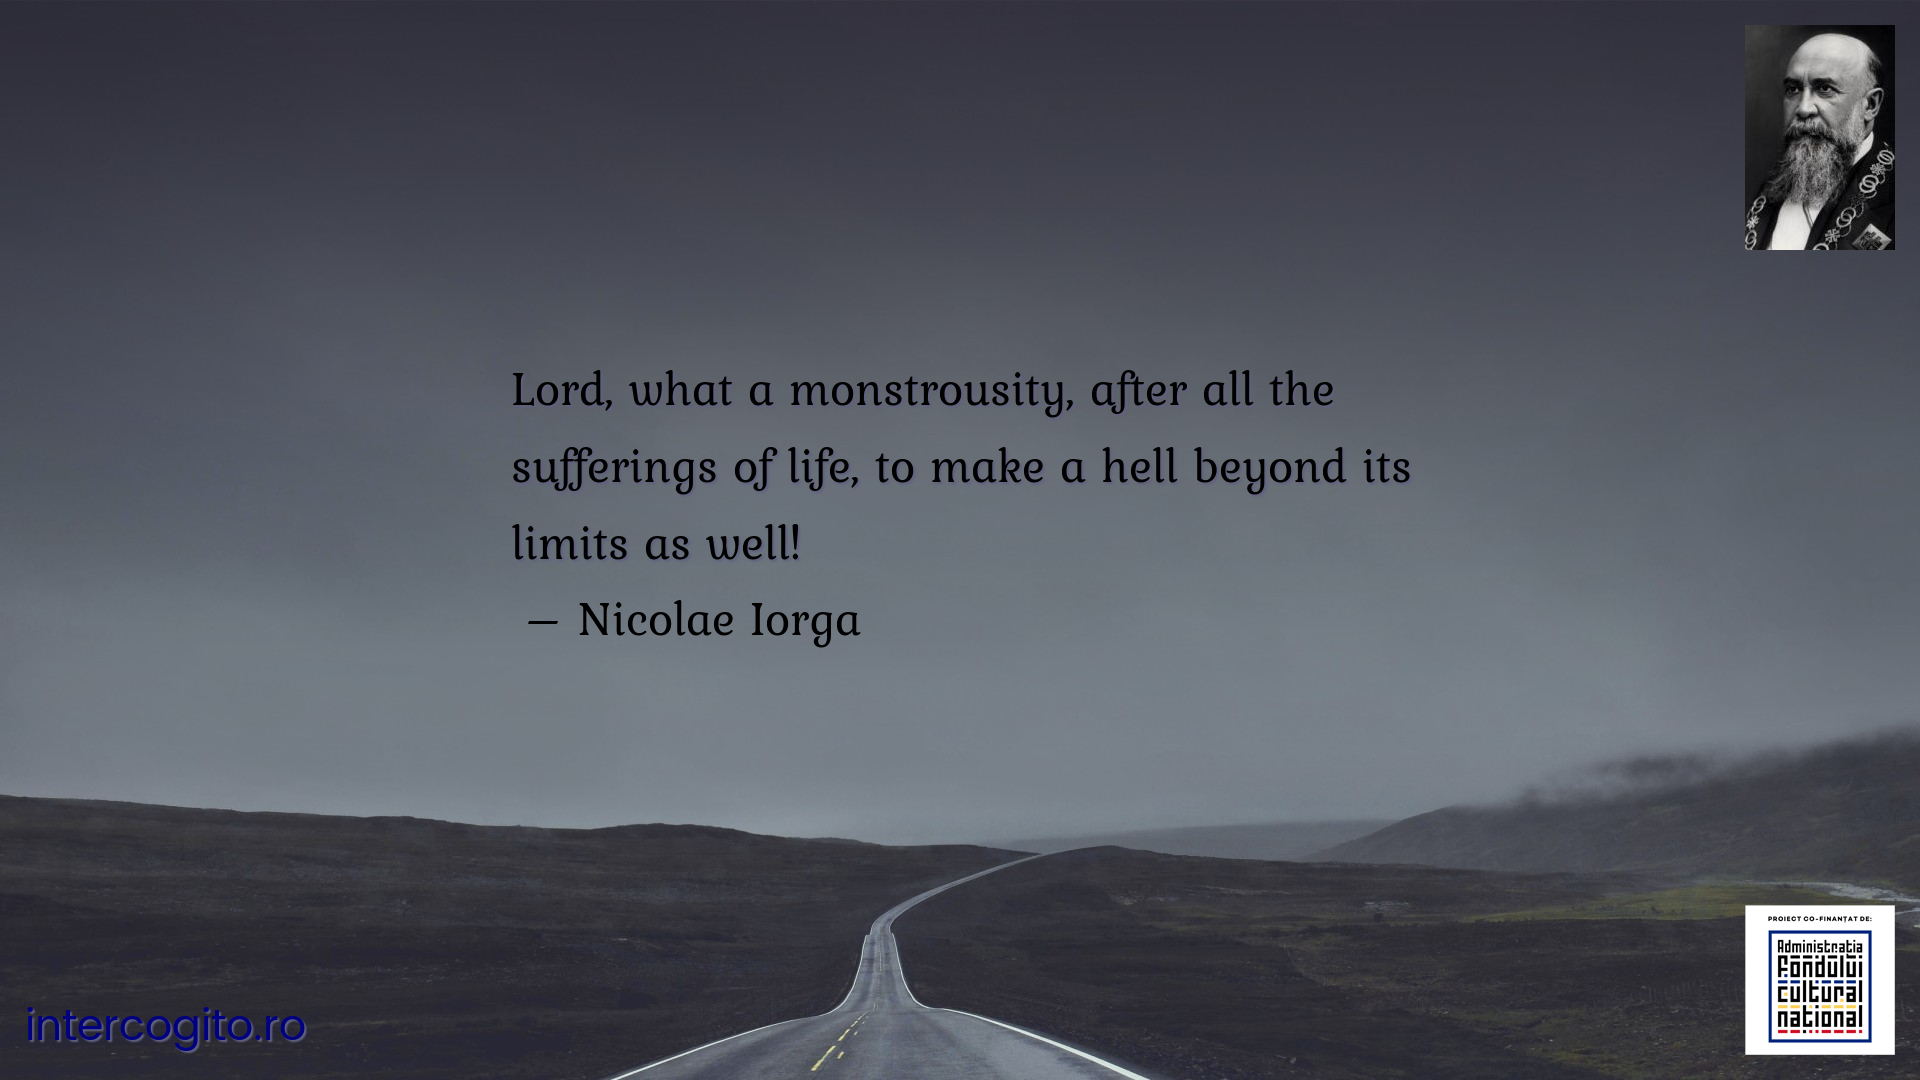 Lord, what a monstrousity, after all the sufferings of life, to make a hell beyond its limits as well!